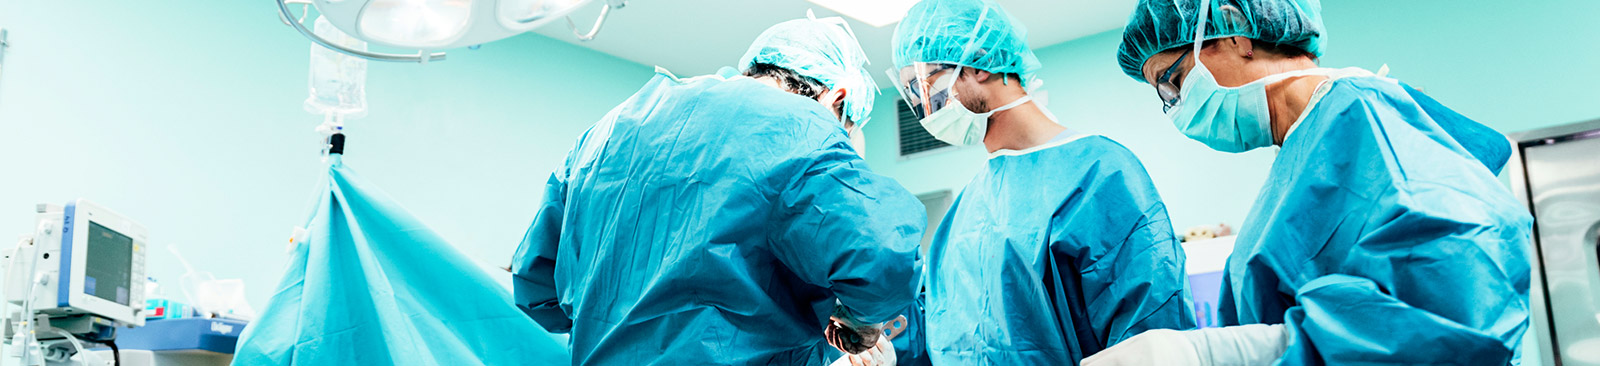 Medical mistakes that can happen during surgery